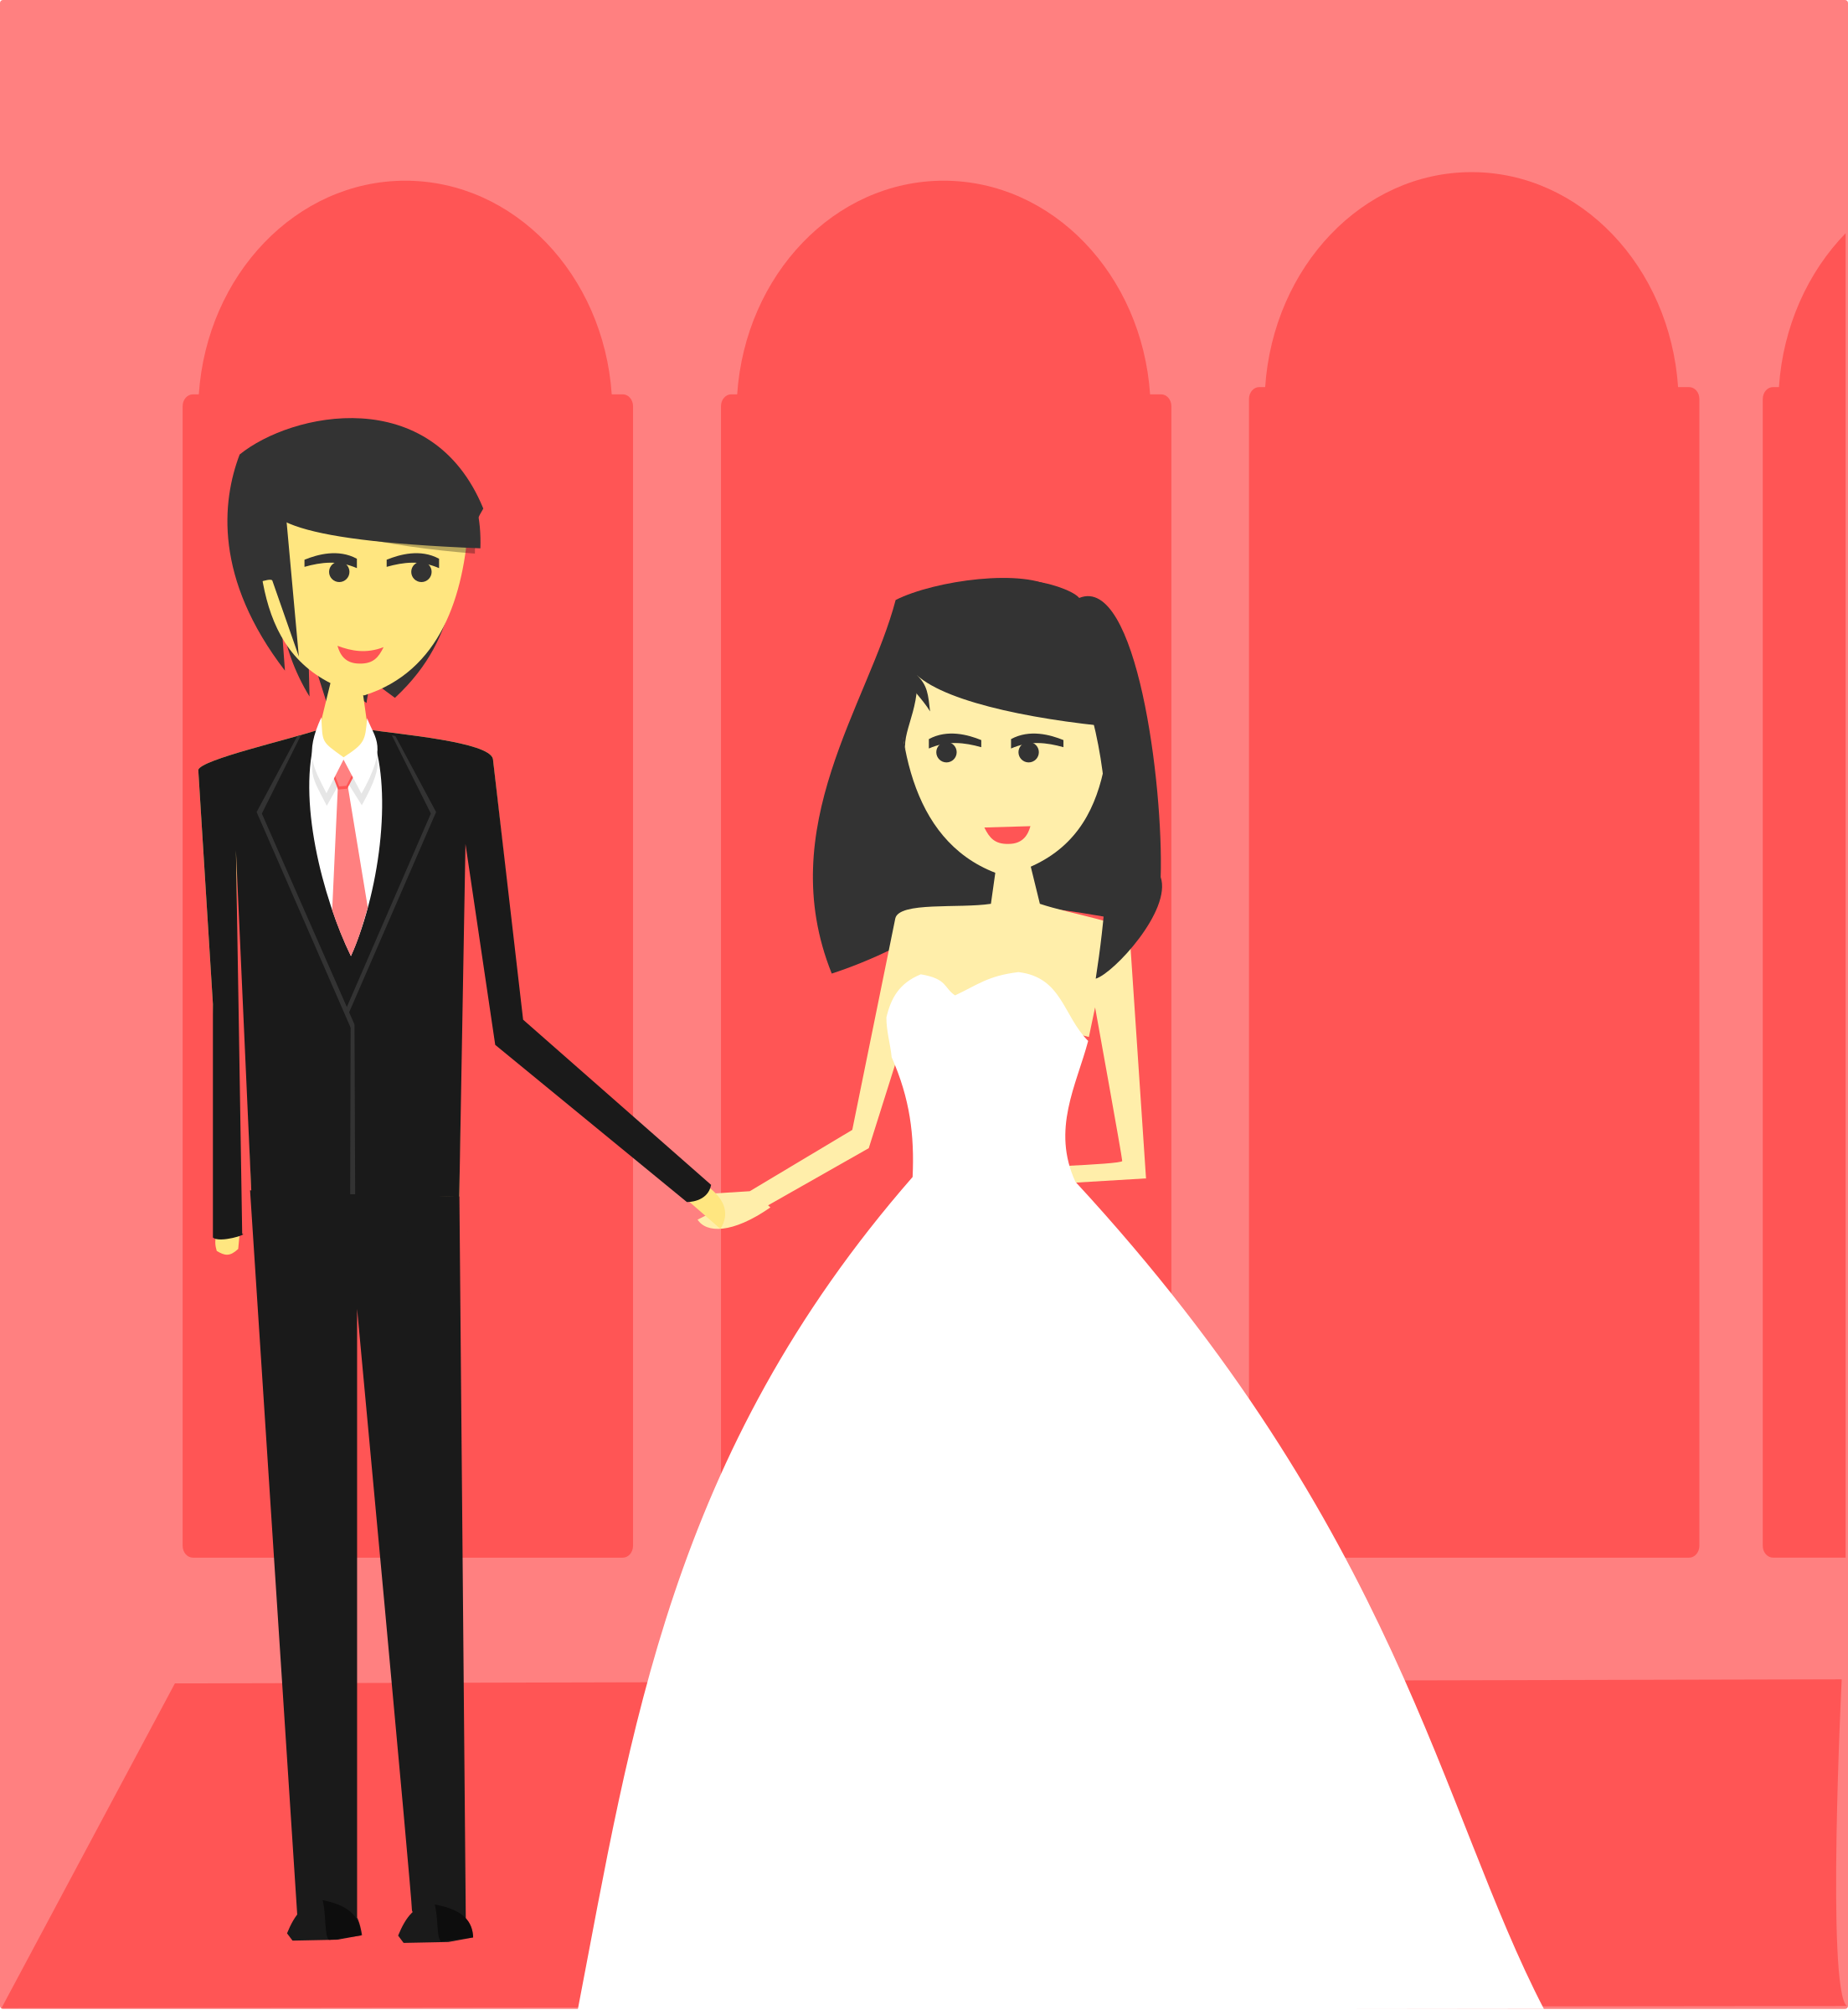 Bride and Groom Wedding Vector Clipart image Free stock